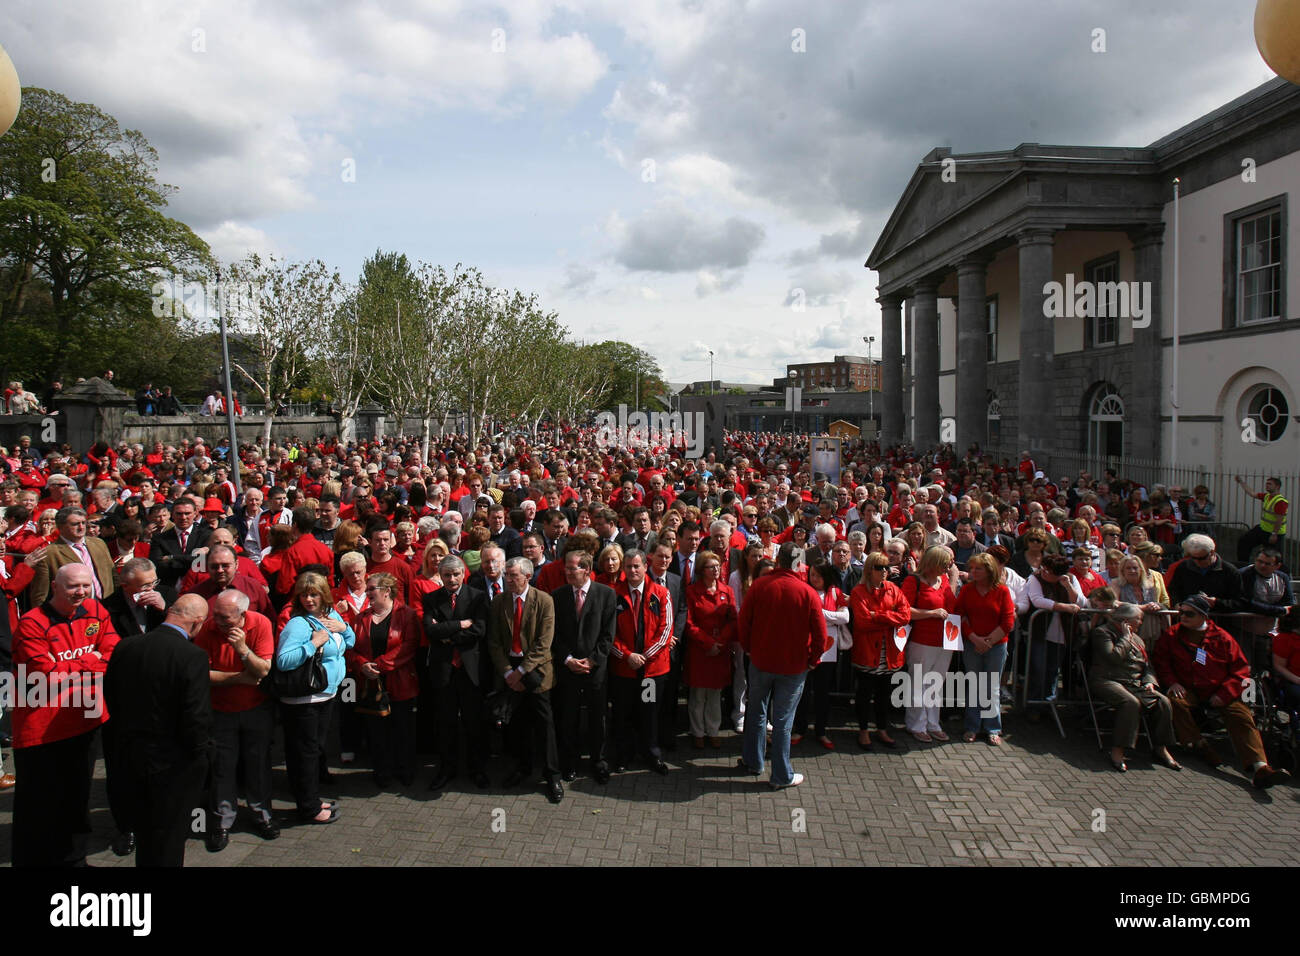 Thousands of people gather for a march through the streets of Limerick in a mass demonstration against gangland violence in the city. Stock Photo